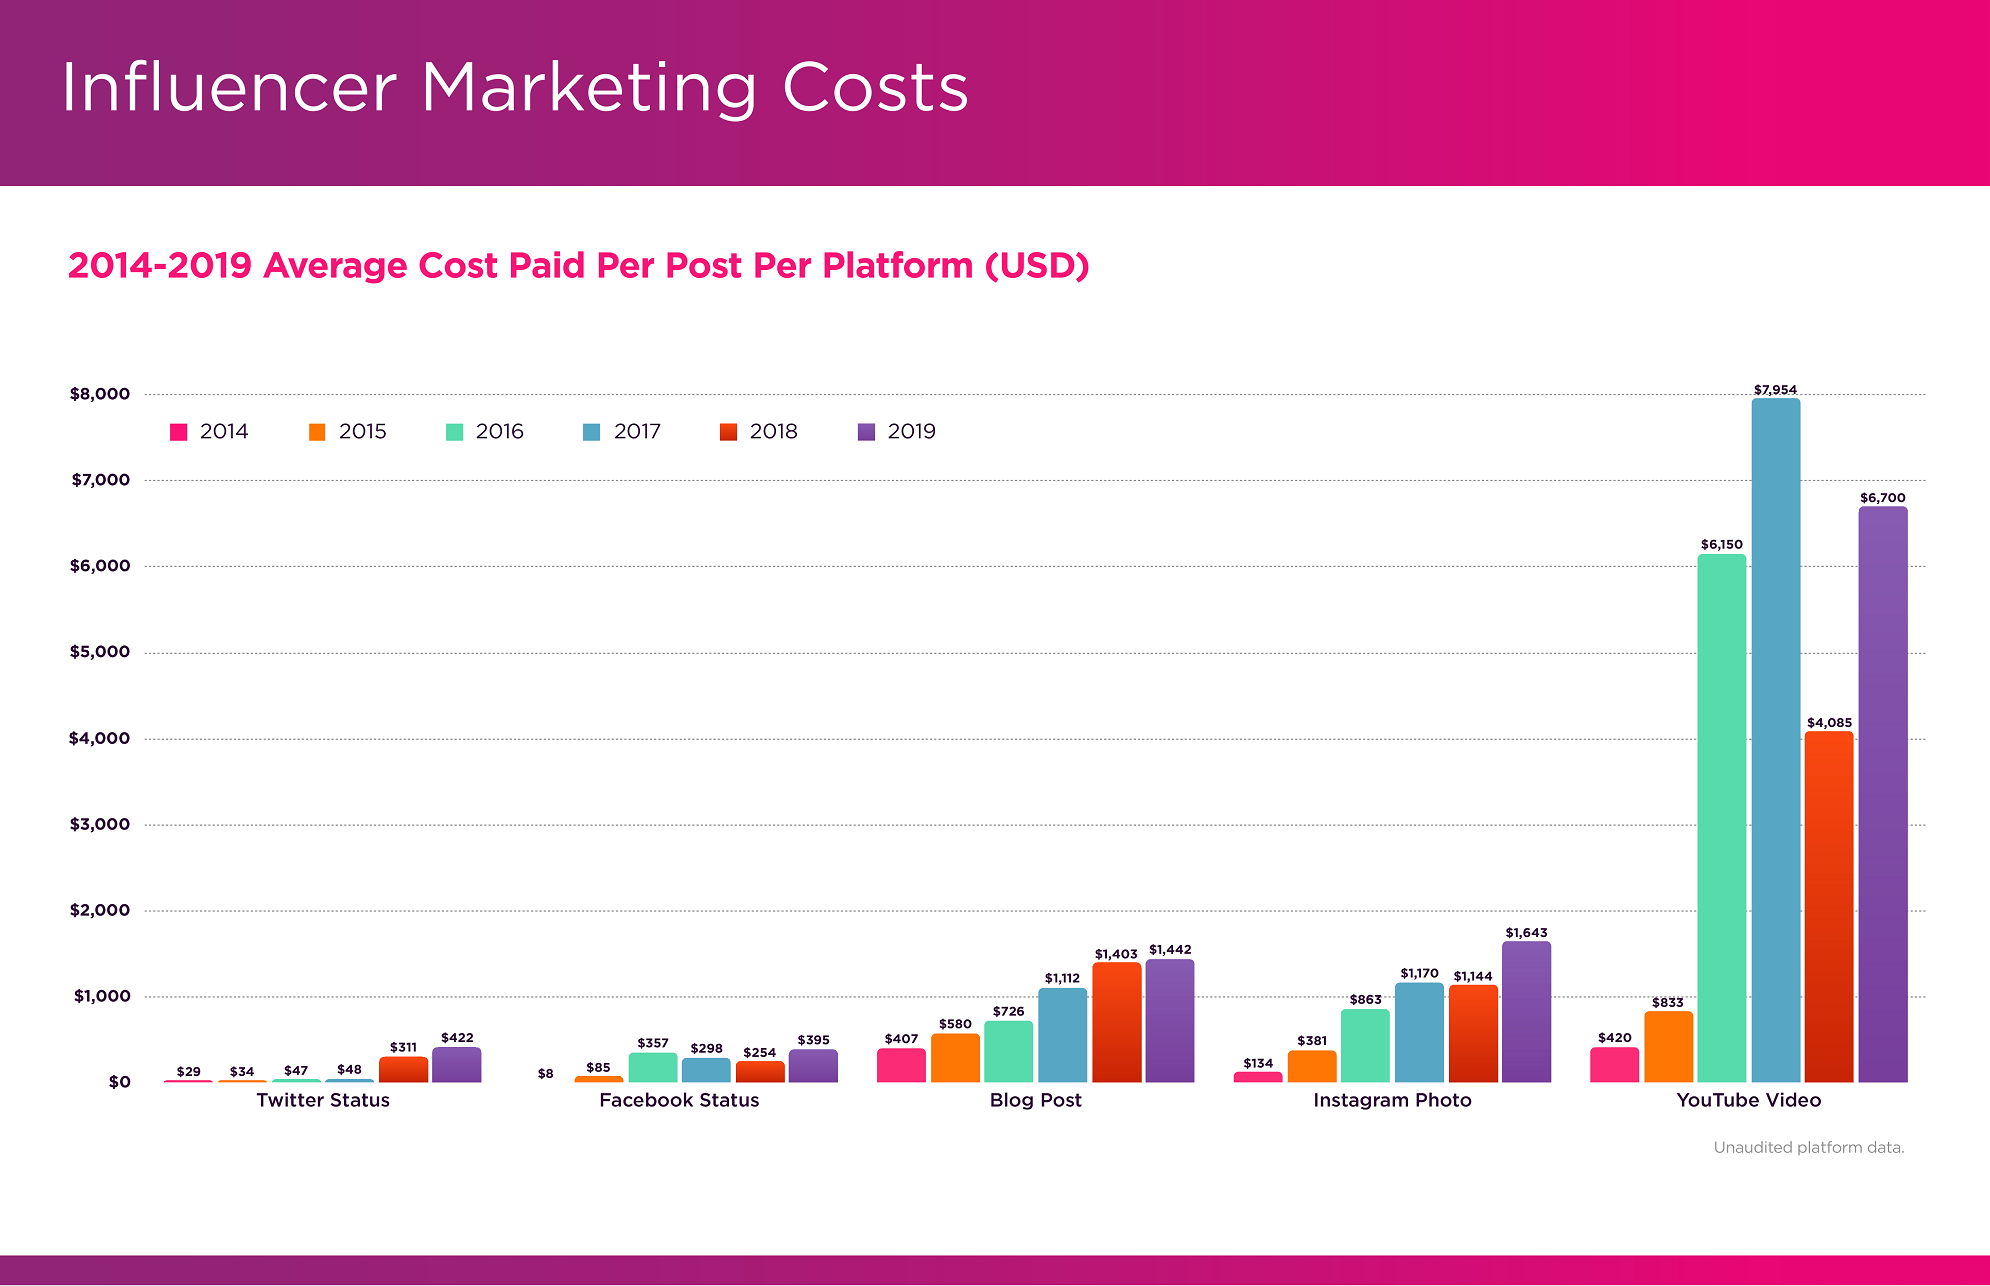 The average cost for a sponsored post on Instagram, YouTube, Facebook, Twitter and Blogs Compared